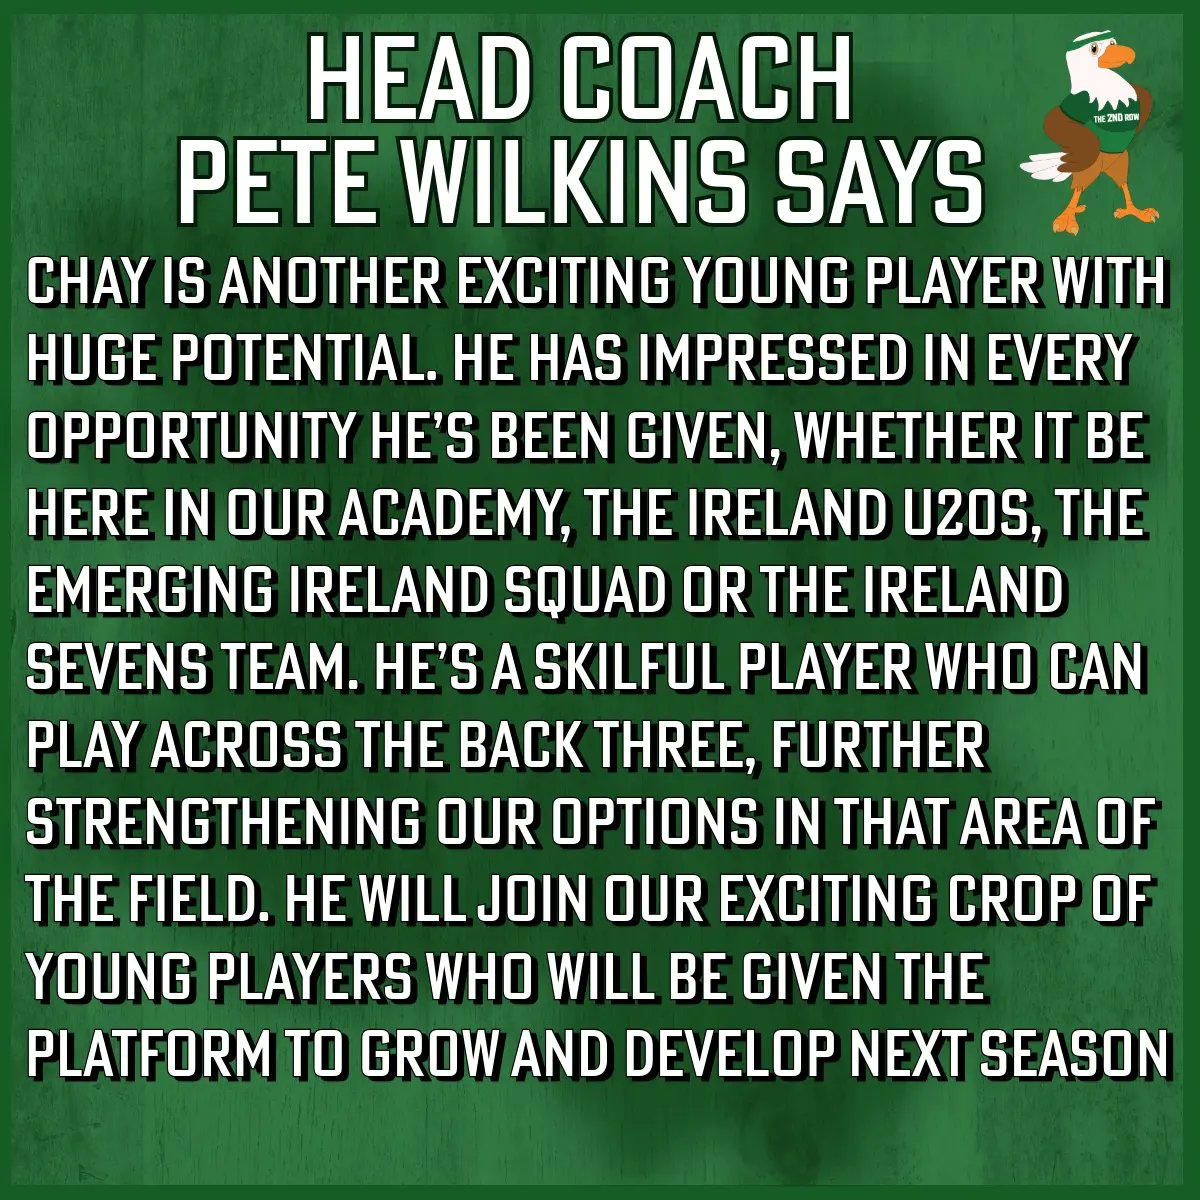 Welcome to the @connachtrugby pro team @ChayMullins_
Impressive versatile back three player who has a u20 six nations medal in his pocket and has had great performances with the @IrishRugby #M7s over the past 18 months